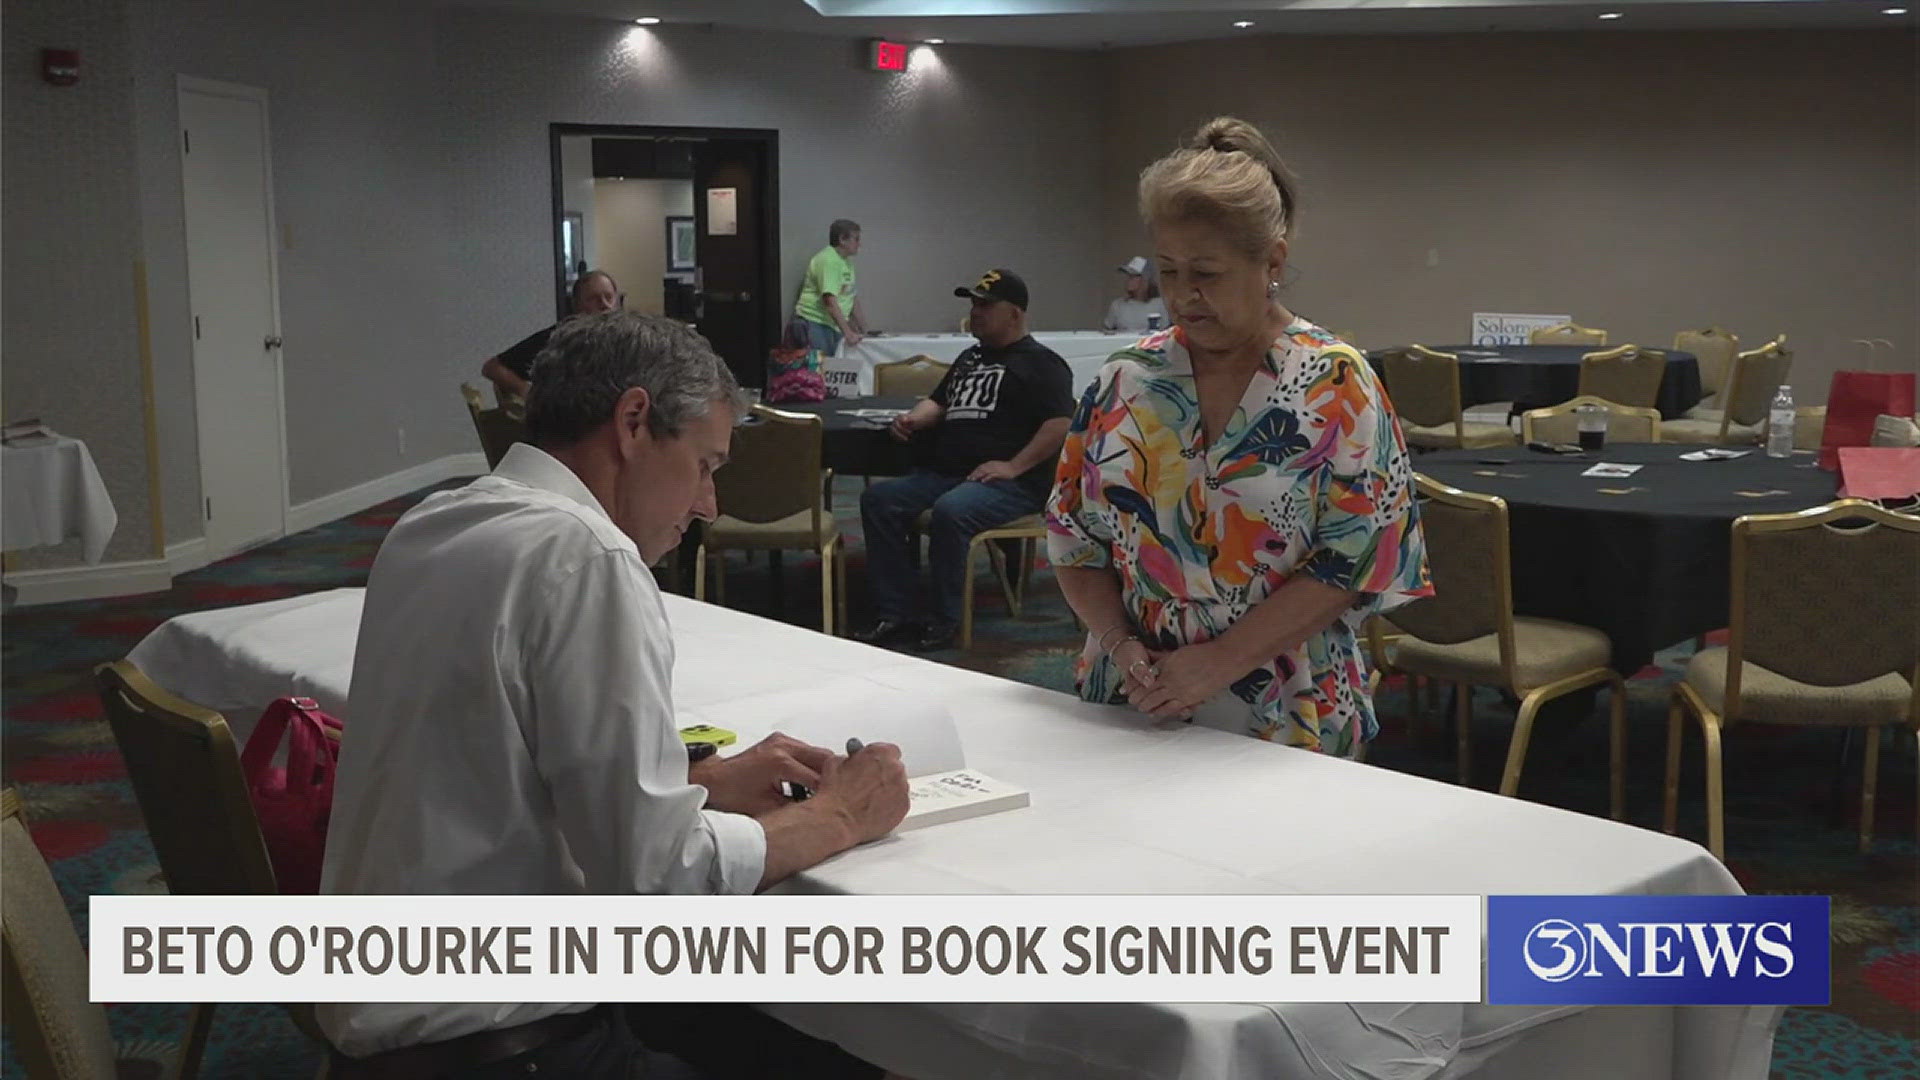 O'Rourke's book titled, "We've Got to Try," is about the history of voting rights and democracy in the state of Texas.